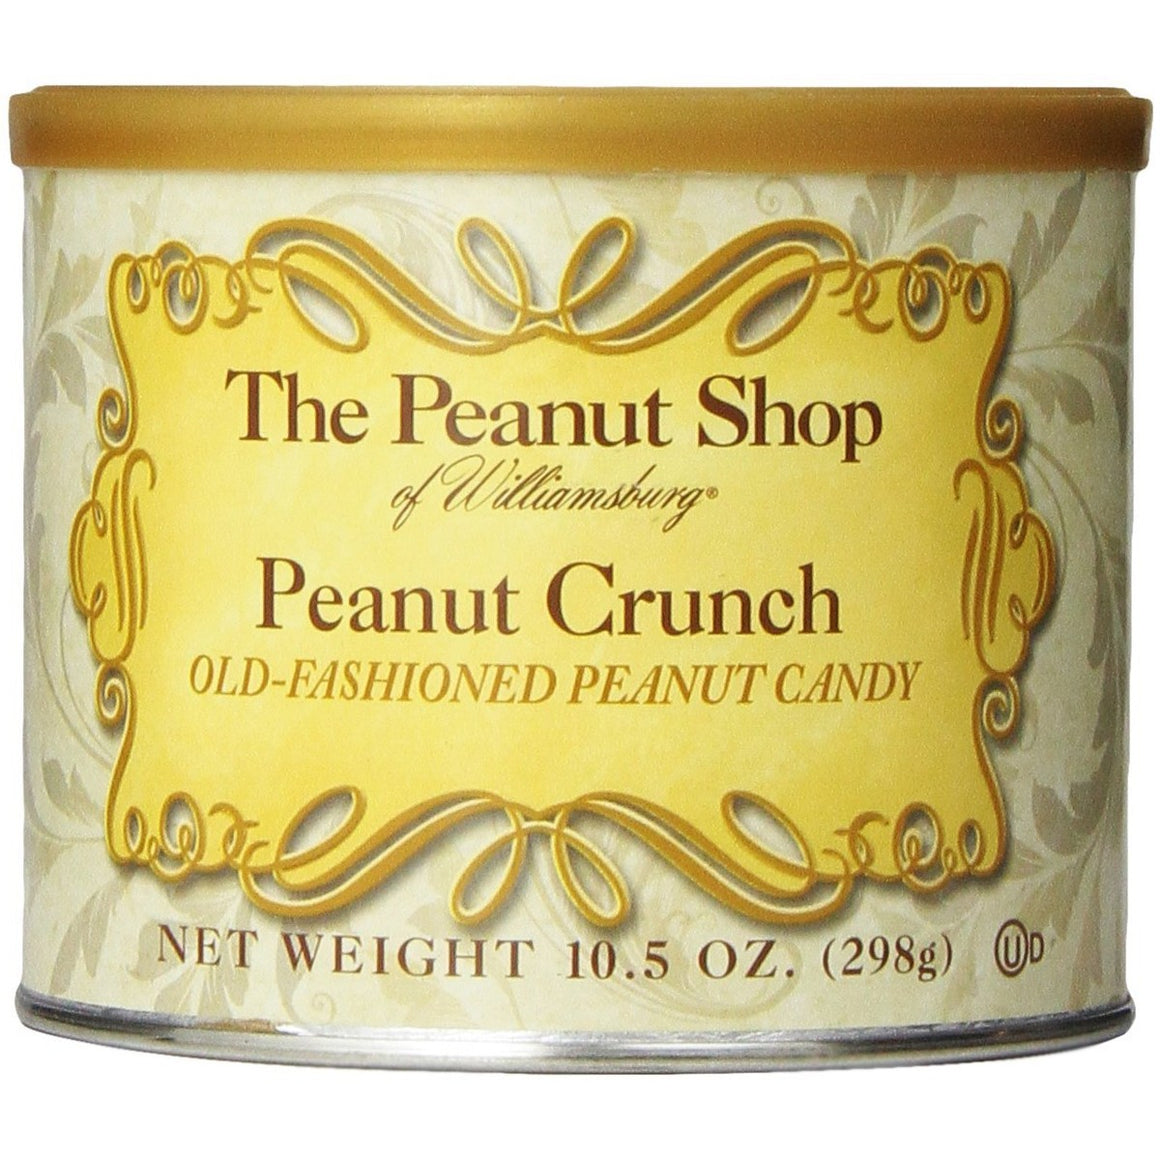 All City Candy The Peanut Shop Peanut Crunch 10.5 oz. Can Snacks The Peanut Shop For fresh candy and great service, visit www.allcitycandy.com